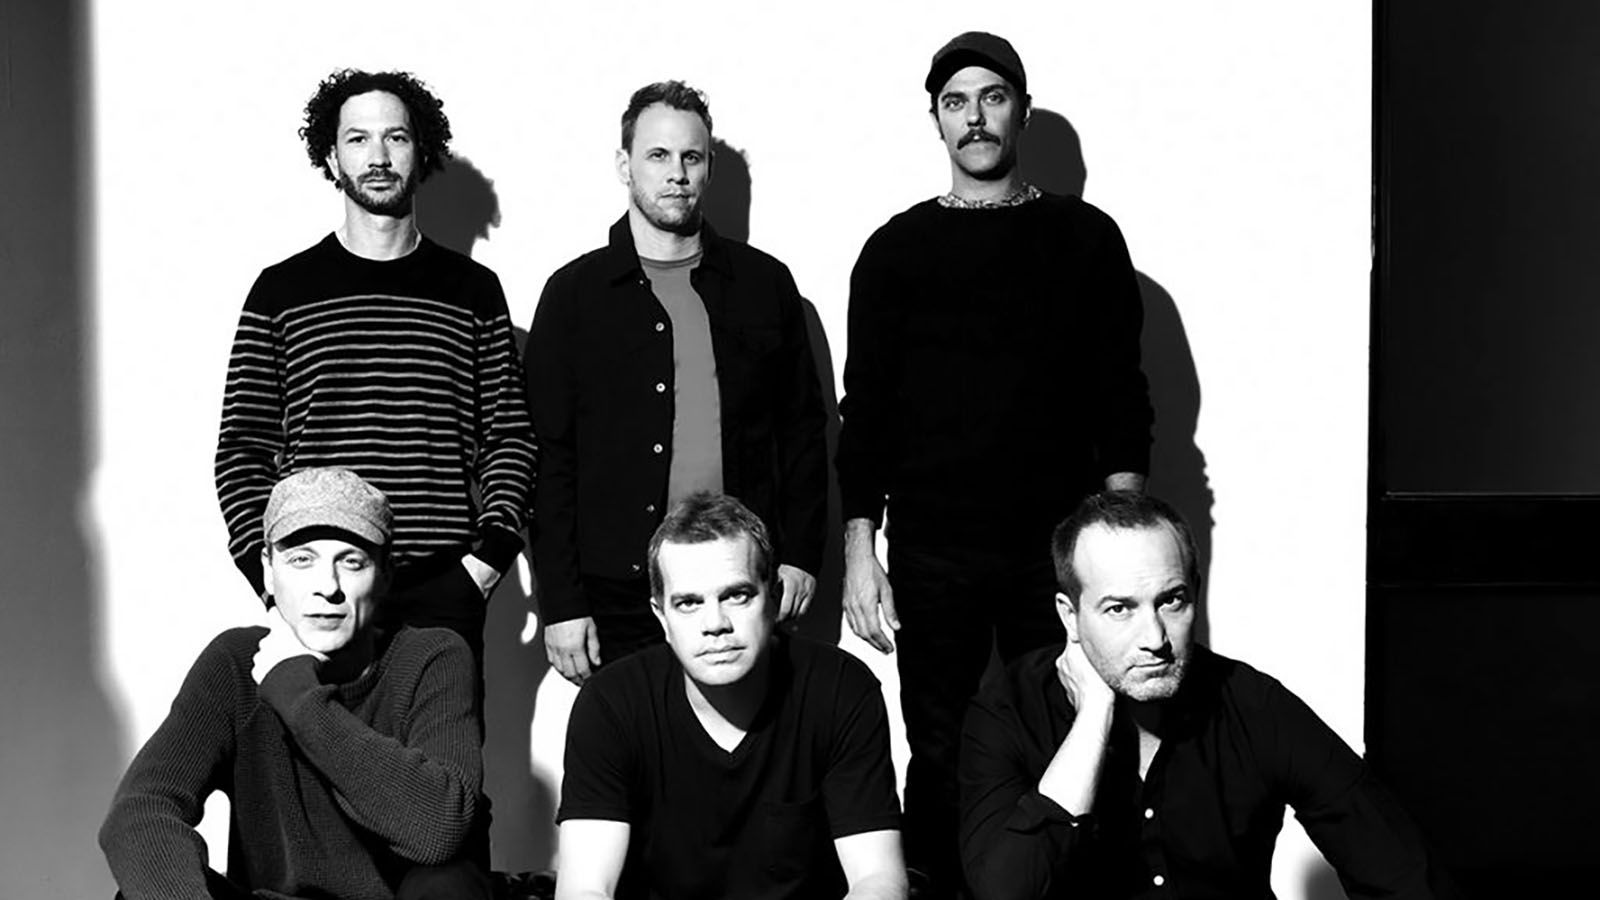 Umphrey's McGee will be at The Clyde on Jan. 26.